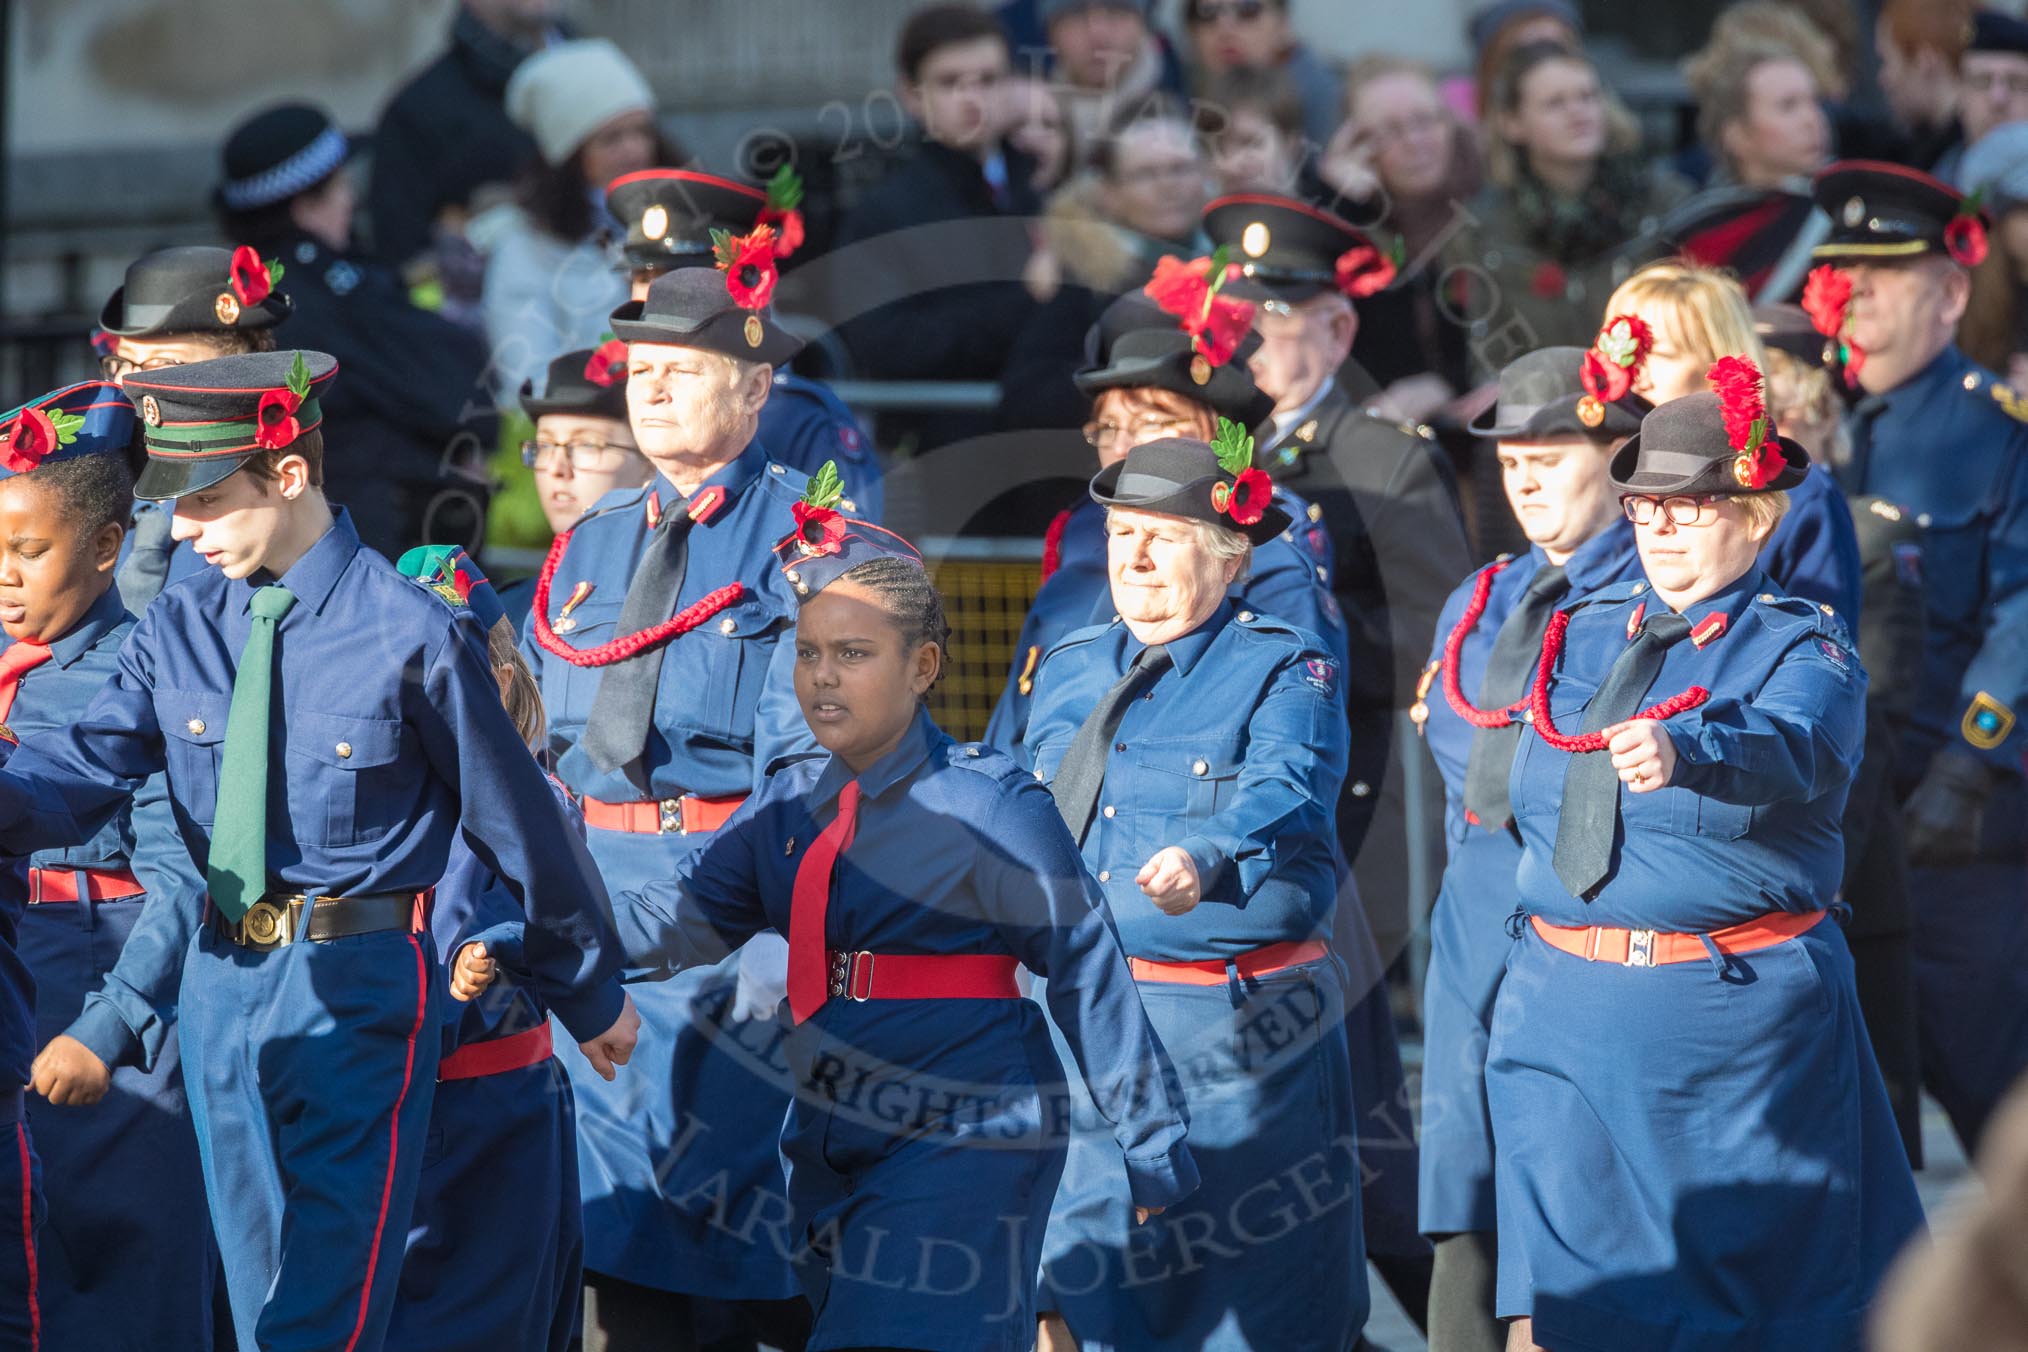 March Past, Remembrance Sunday at the Cenotaph 2016: M36 Church Lads & Church Girls Brigade.
Cenotaph, Whitehall, London SW1,
London,
Greater London,
United Kingdom,
on 13 November 2016 at 13:19, image #2890